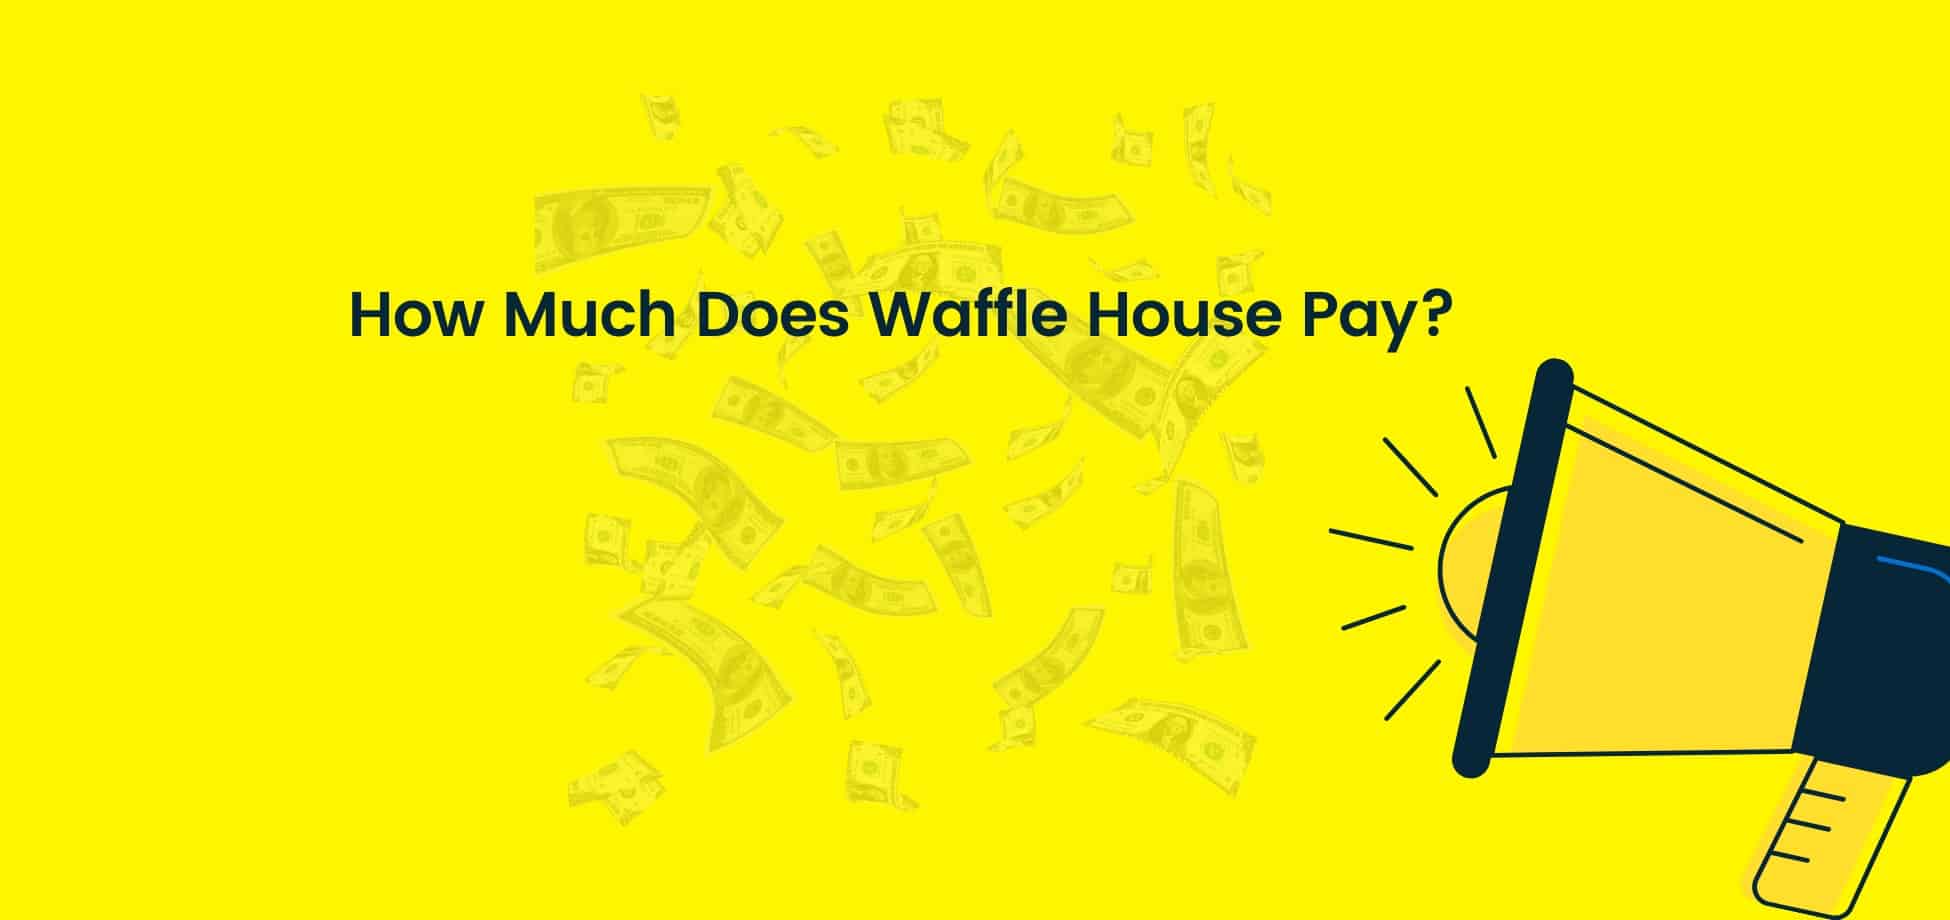 The Waffle House salary structure can use an overhaul if the company plans on keeping employees motivated enough to continue serving great food at a fast pace. 